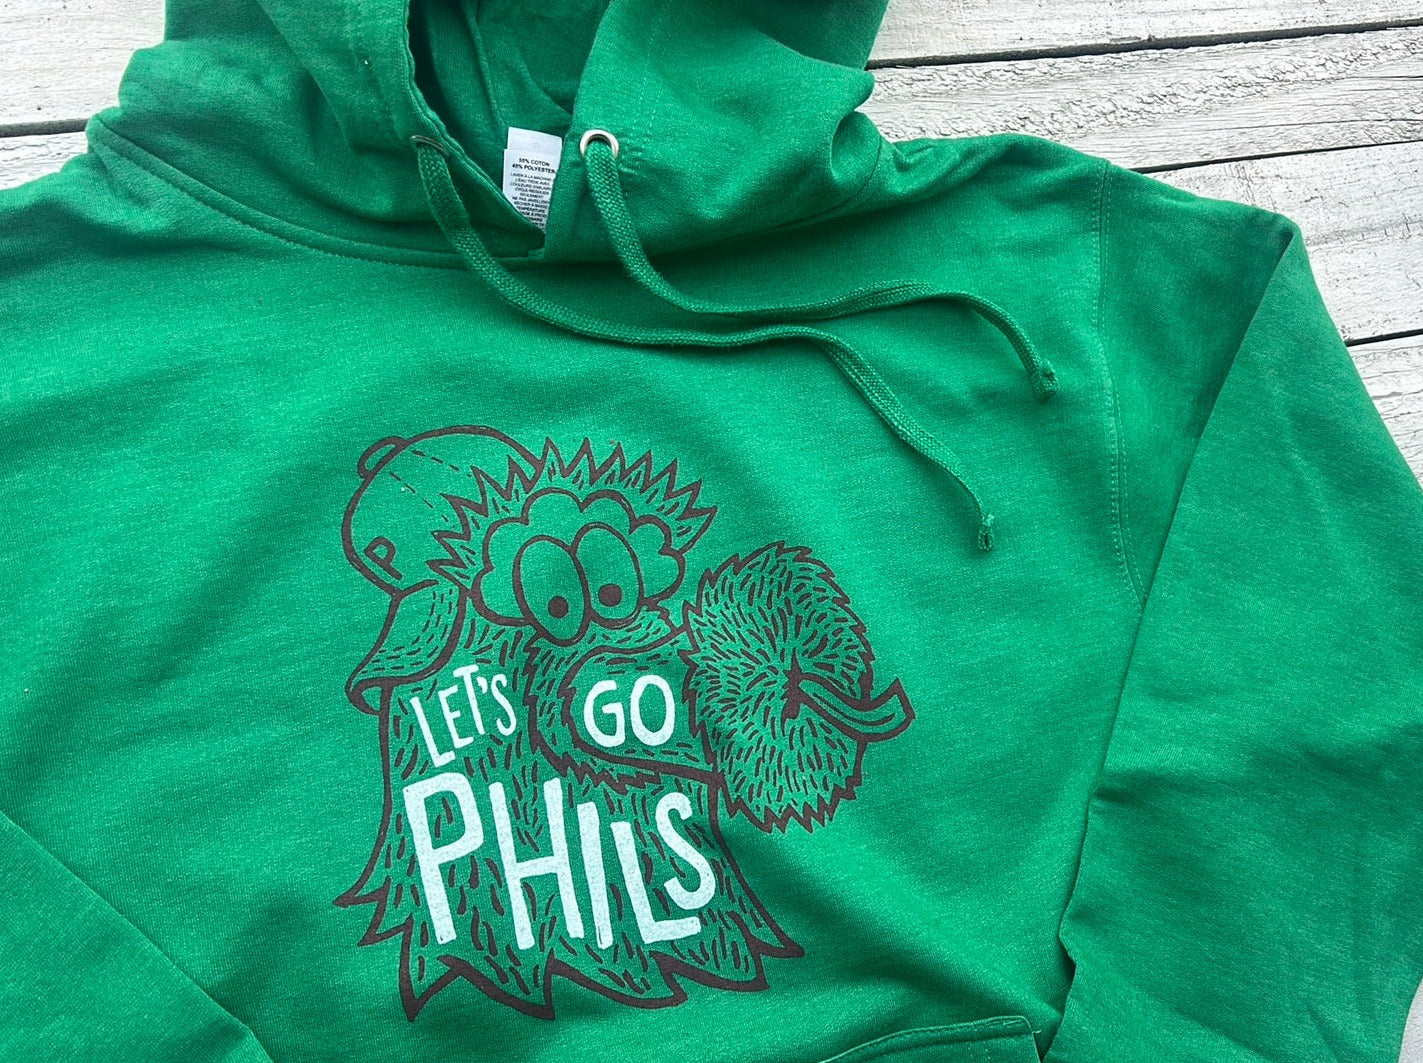 BlueRooted Let's Go Phils Phanatic - Green